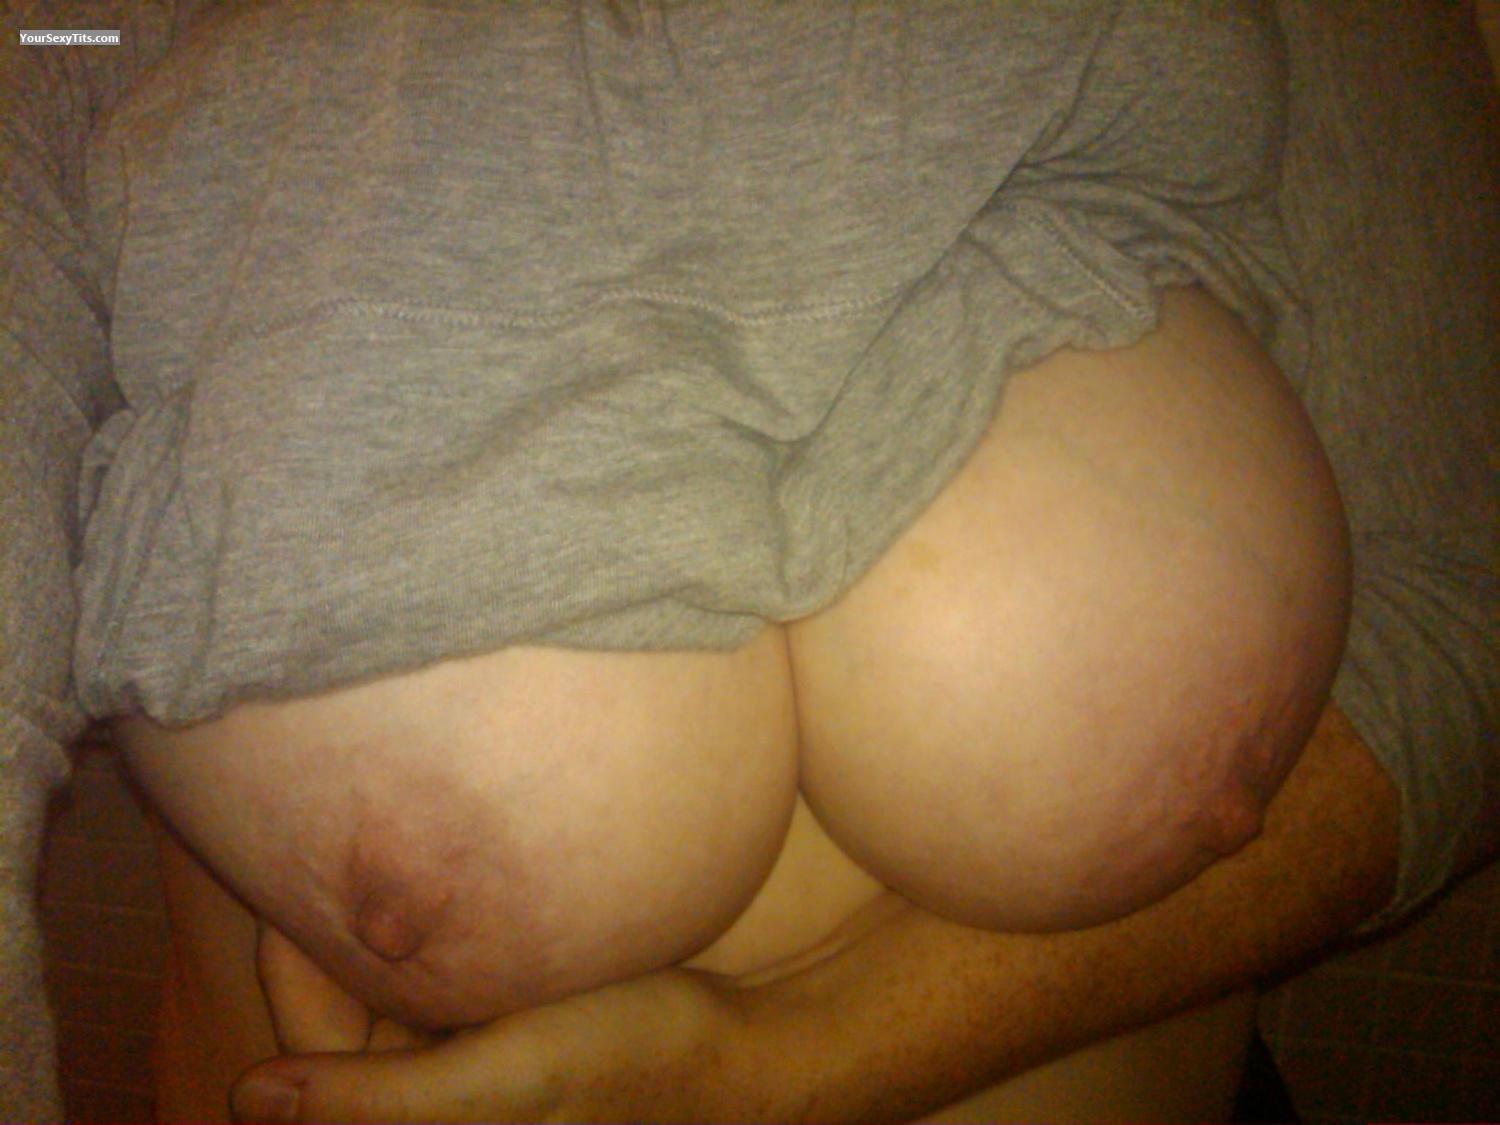 Tit Flash: My Very Big Tits By IPhone (Selfie) - Babybug from United States